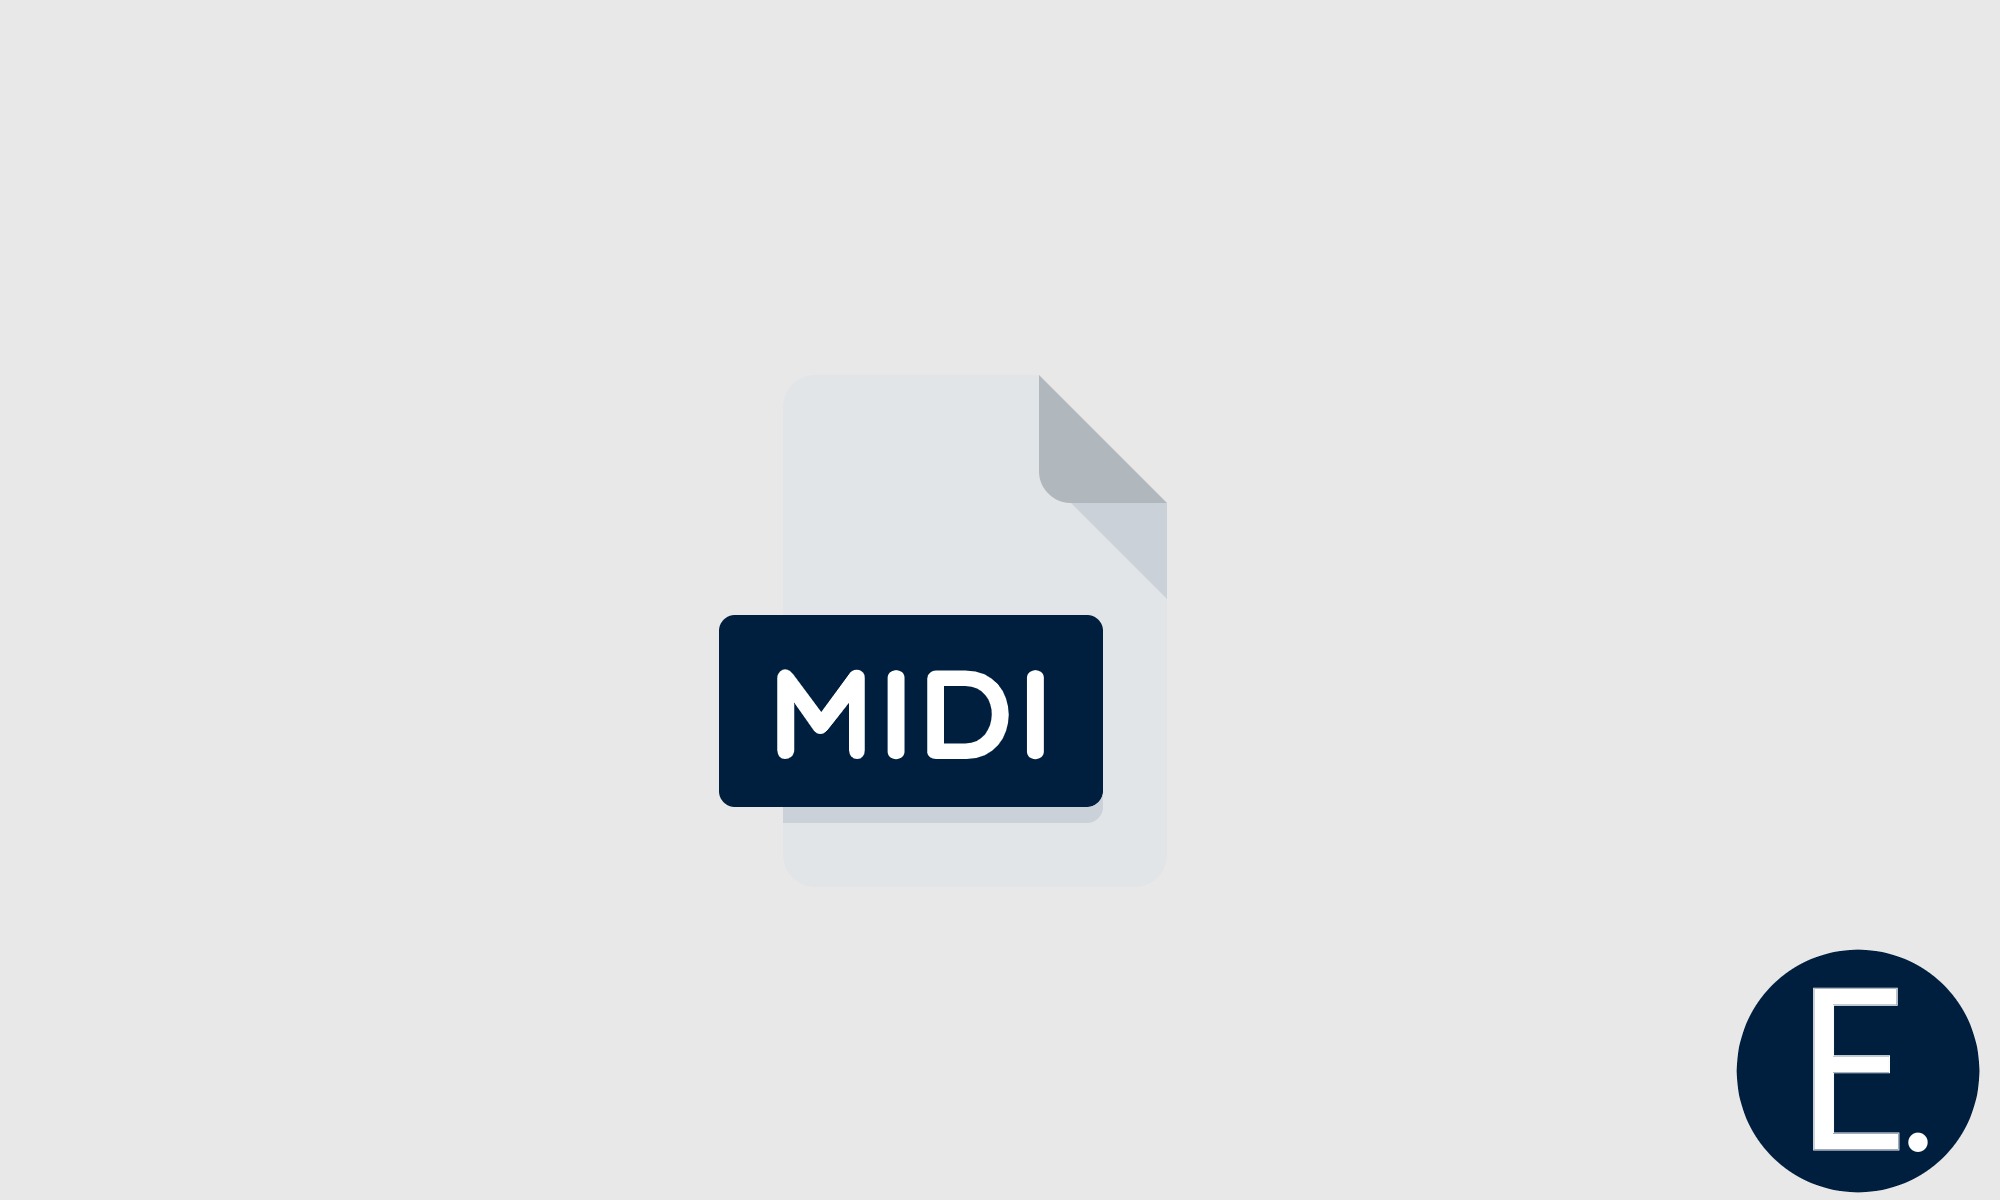 What is a MIDI File